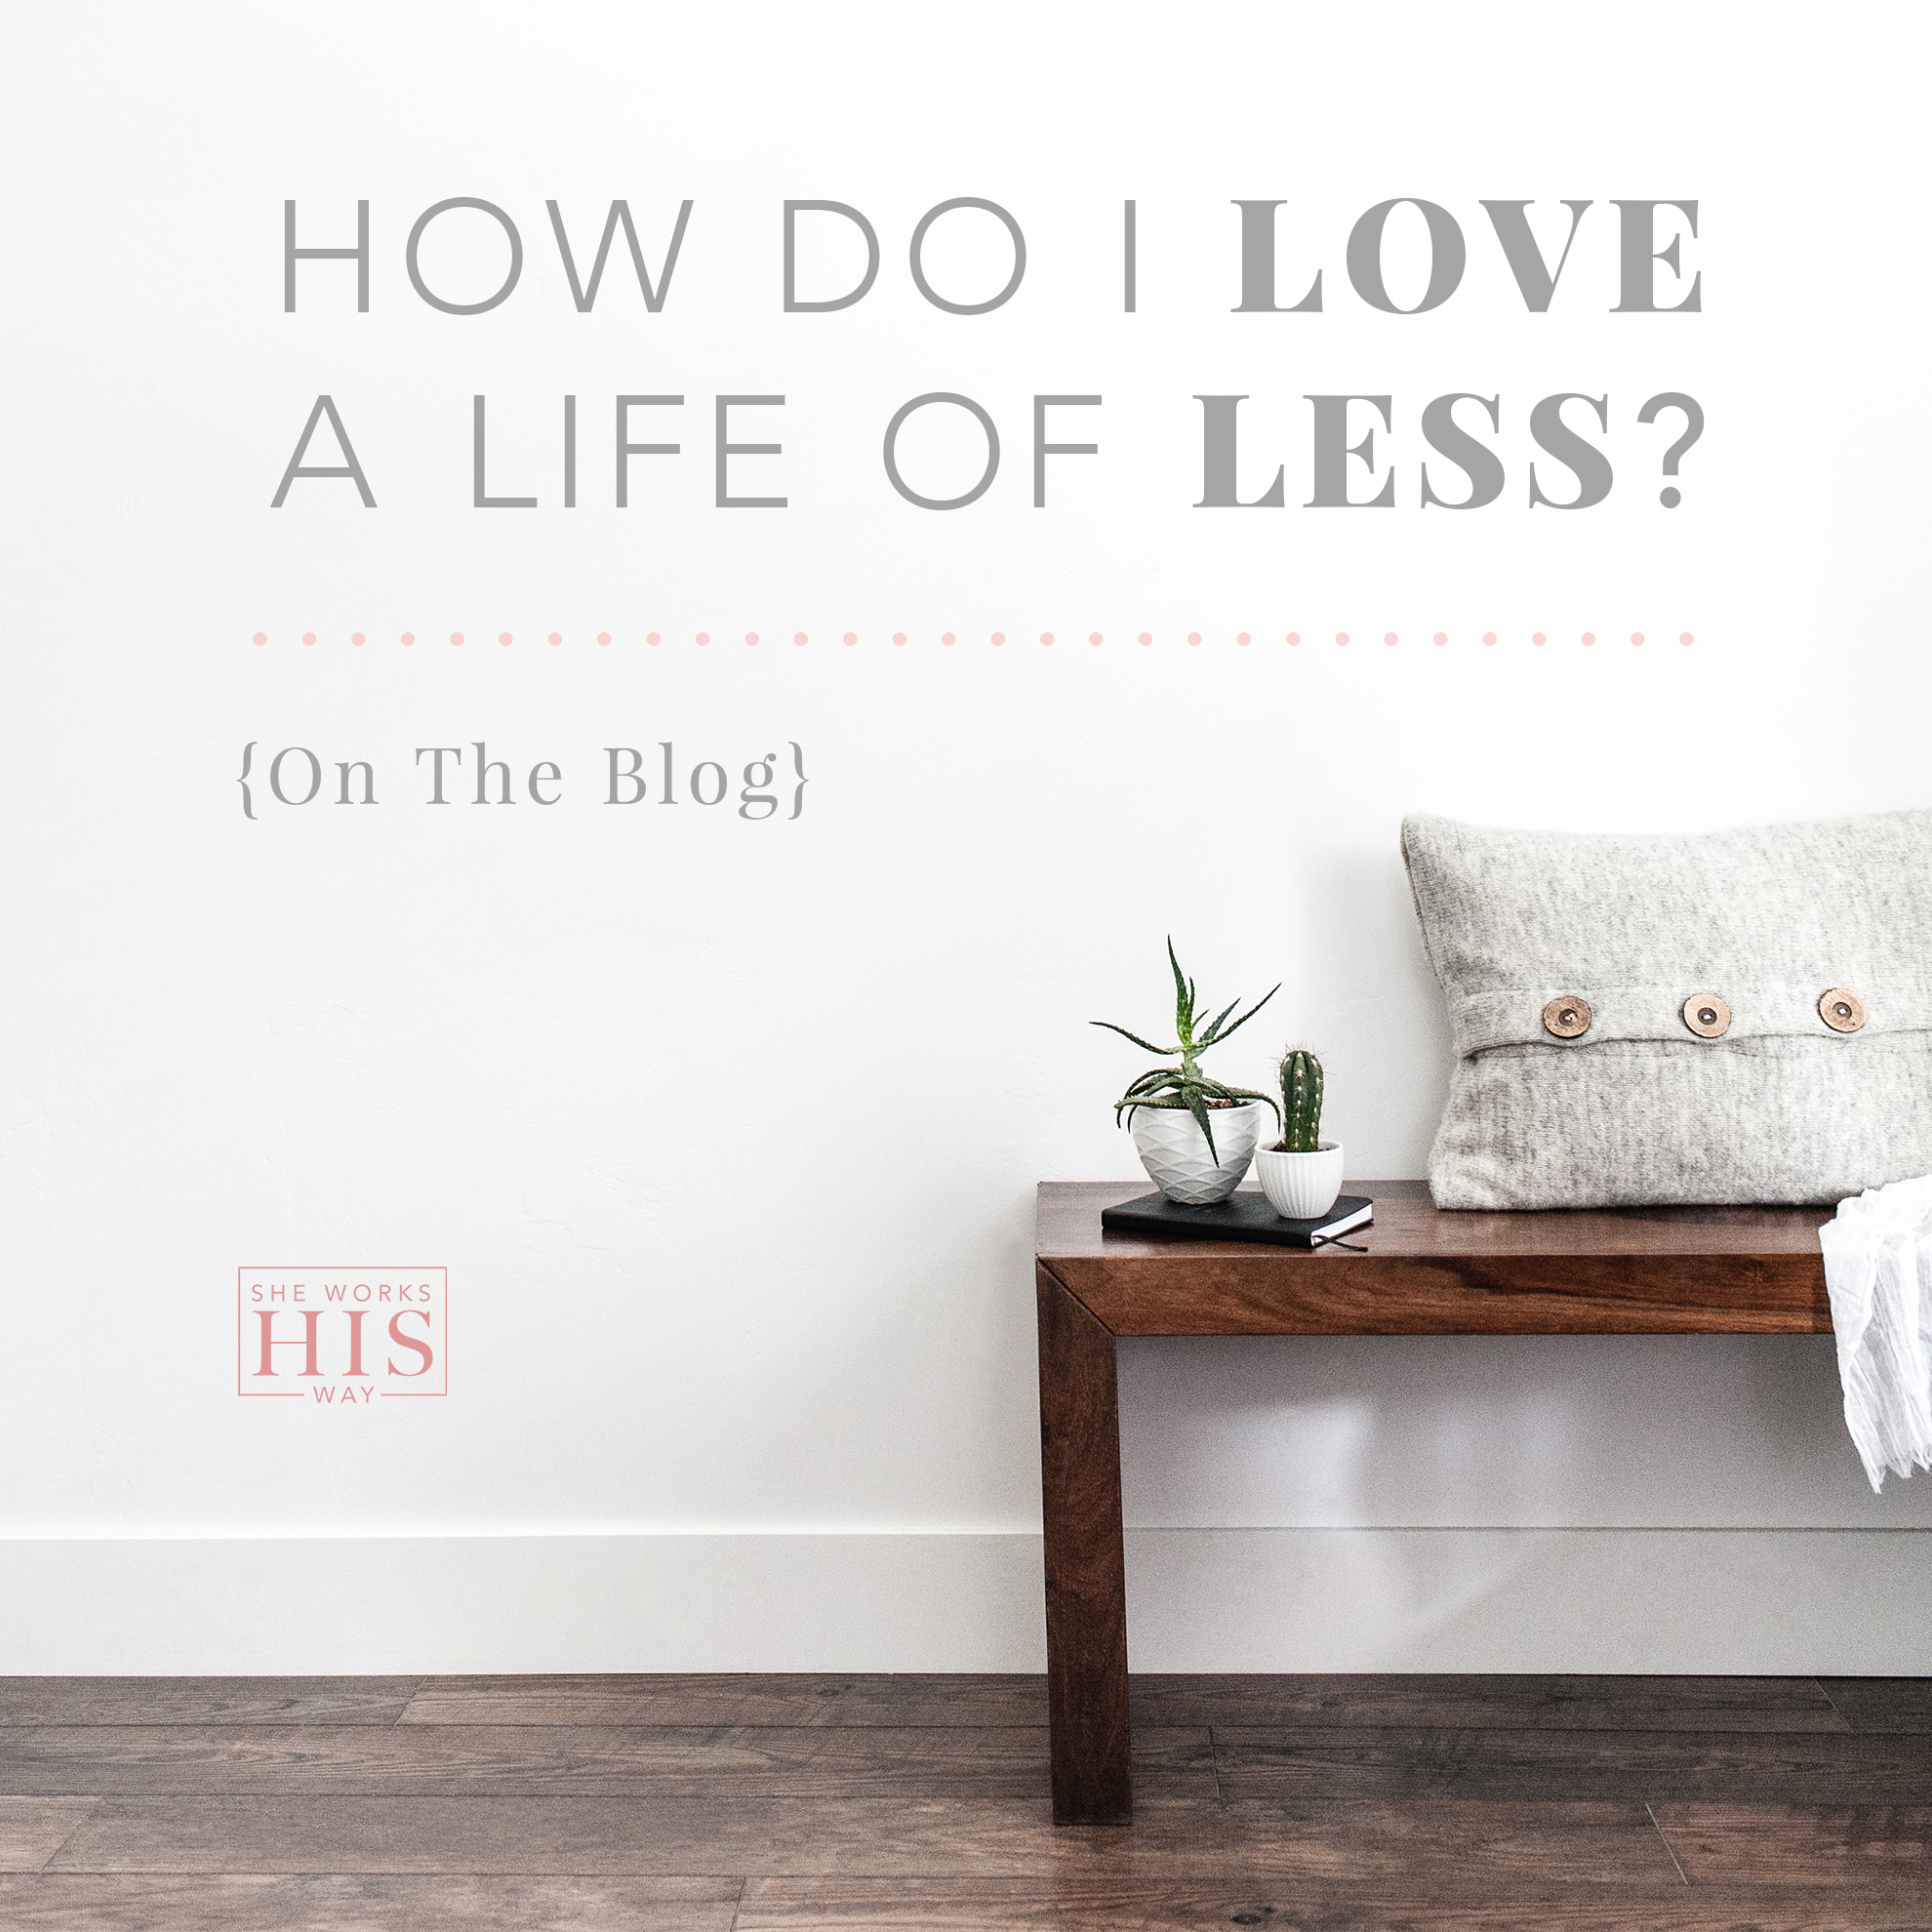 How Do I Love a Life of Less? – She Works HIS Way